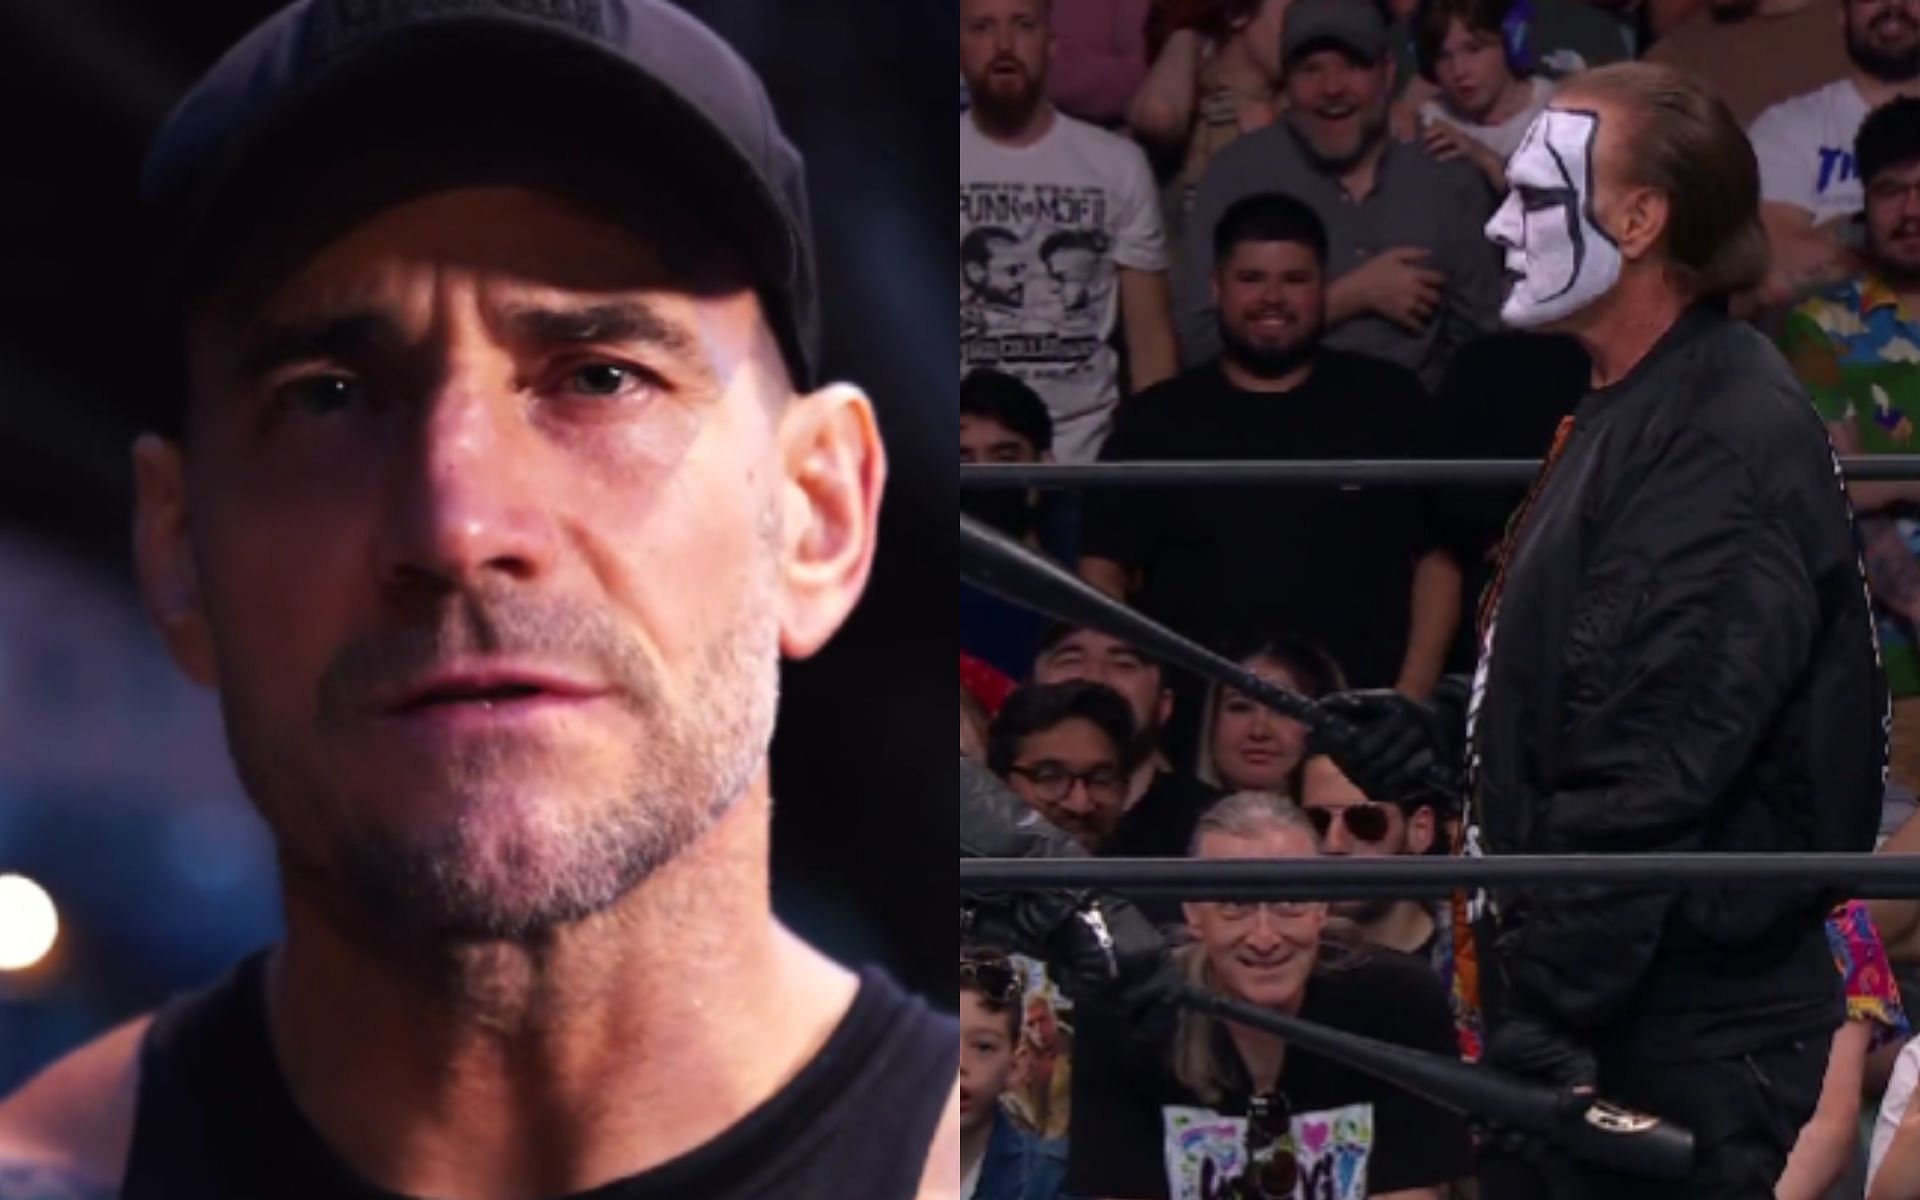 (Right) CM Punk during the vignette aired on AEW Dynamite (Left) Sting amidst a confrontation